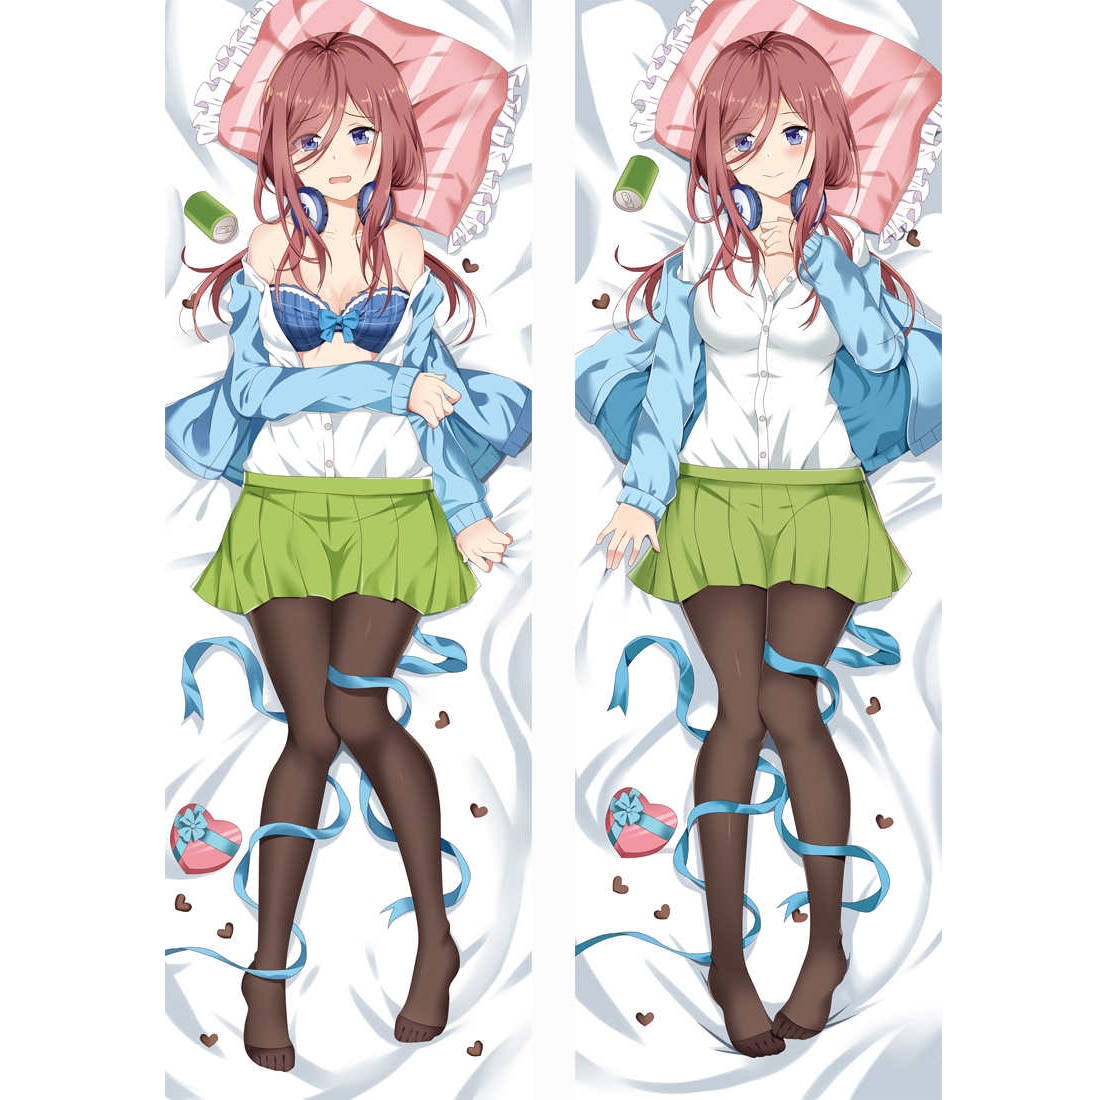 The Quintessential Quintuplets – Nino Nakano Themed Dakimakura Hugging Body Pillow Cover Bed & Pillow Covers